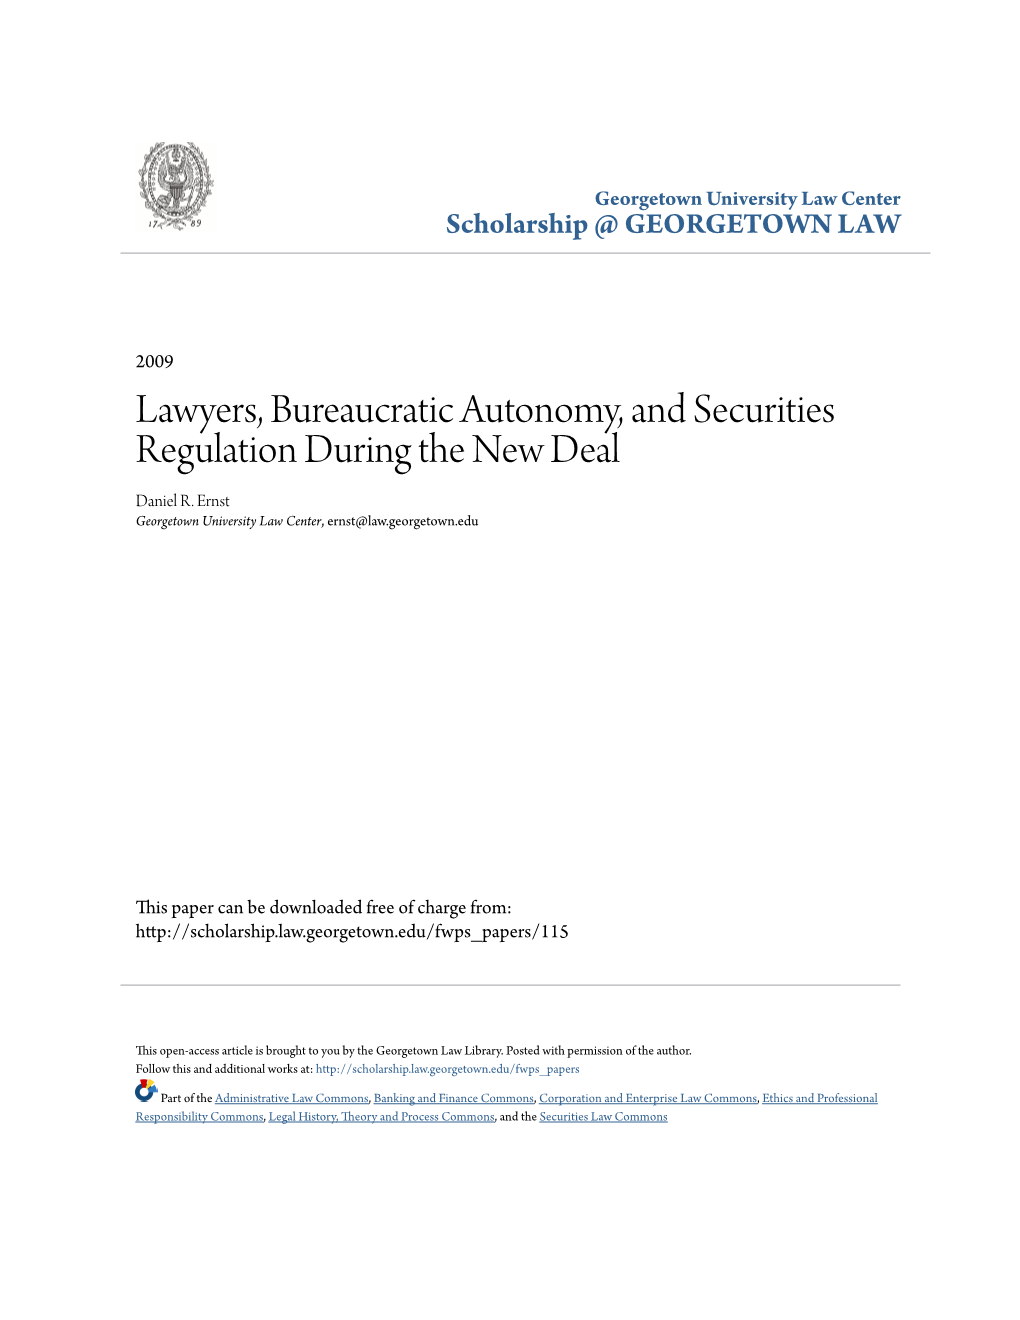 Lawyers, Bureaucratic Autonomy, and Securities Regulation During the New Deal Daniel R